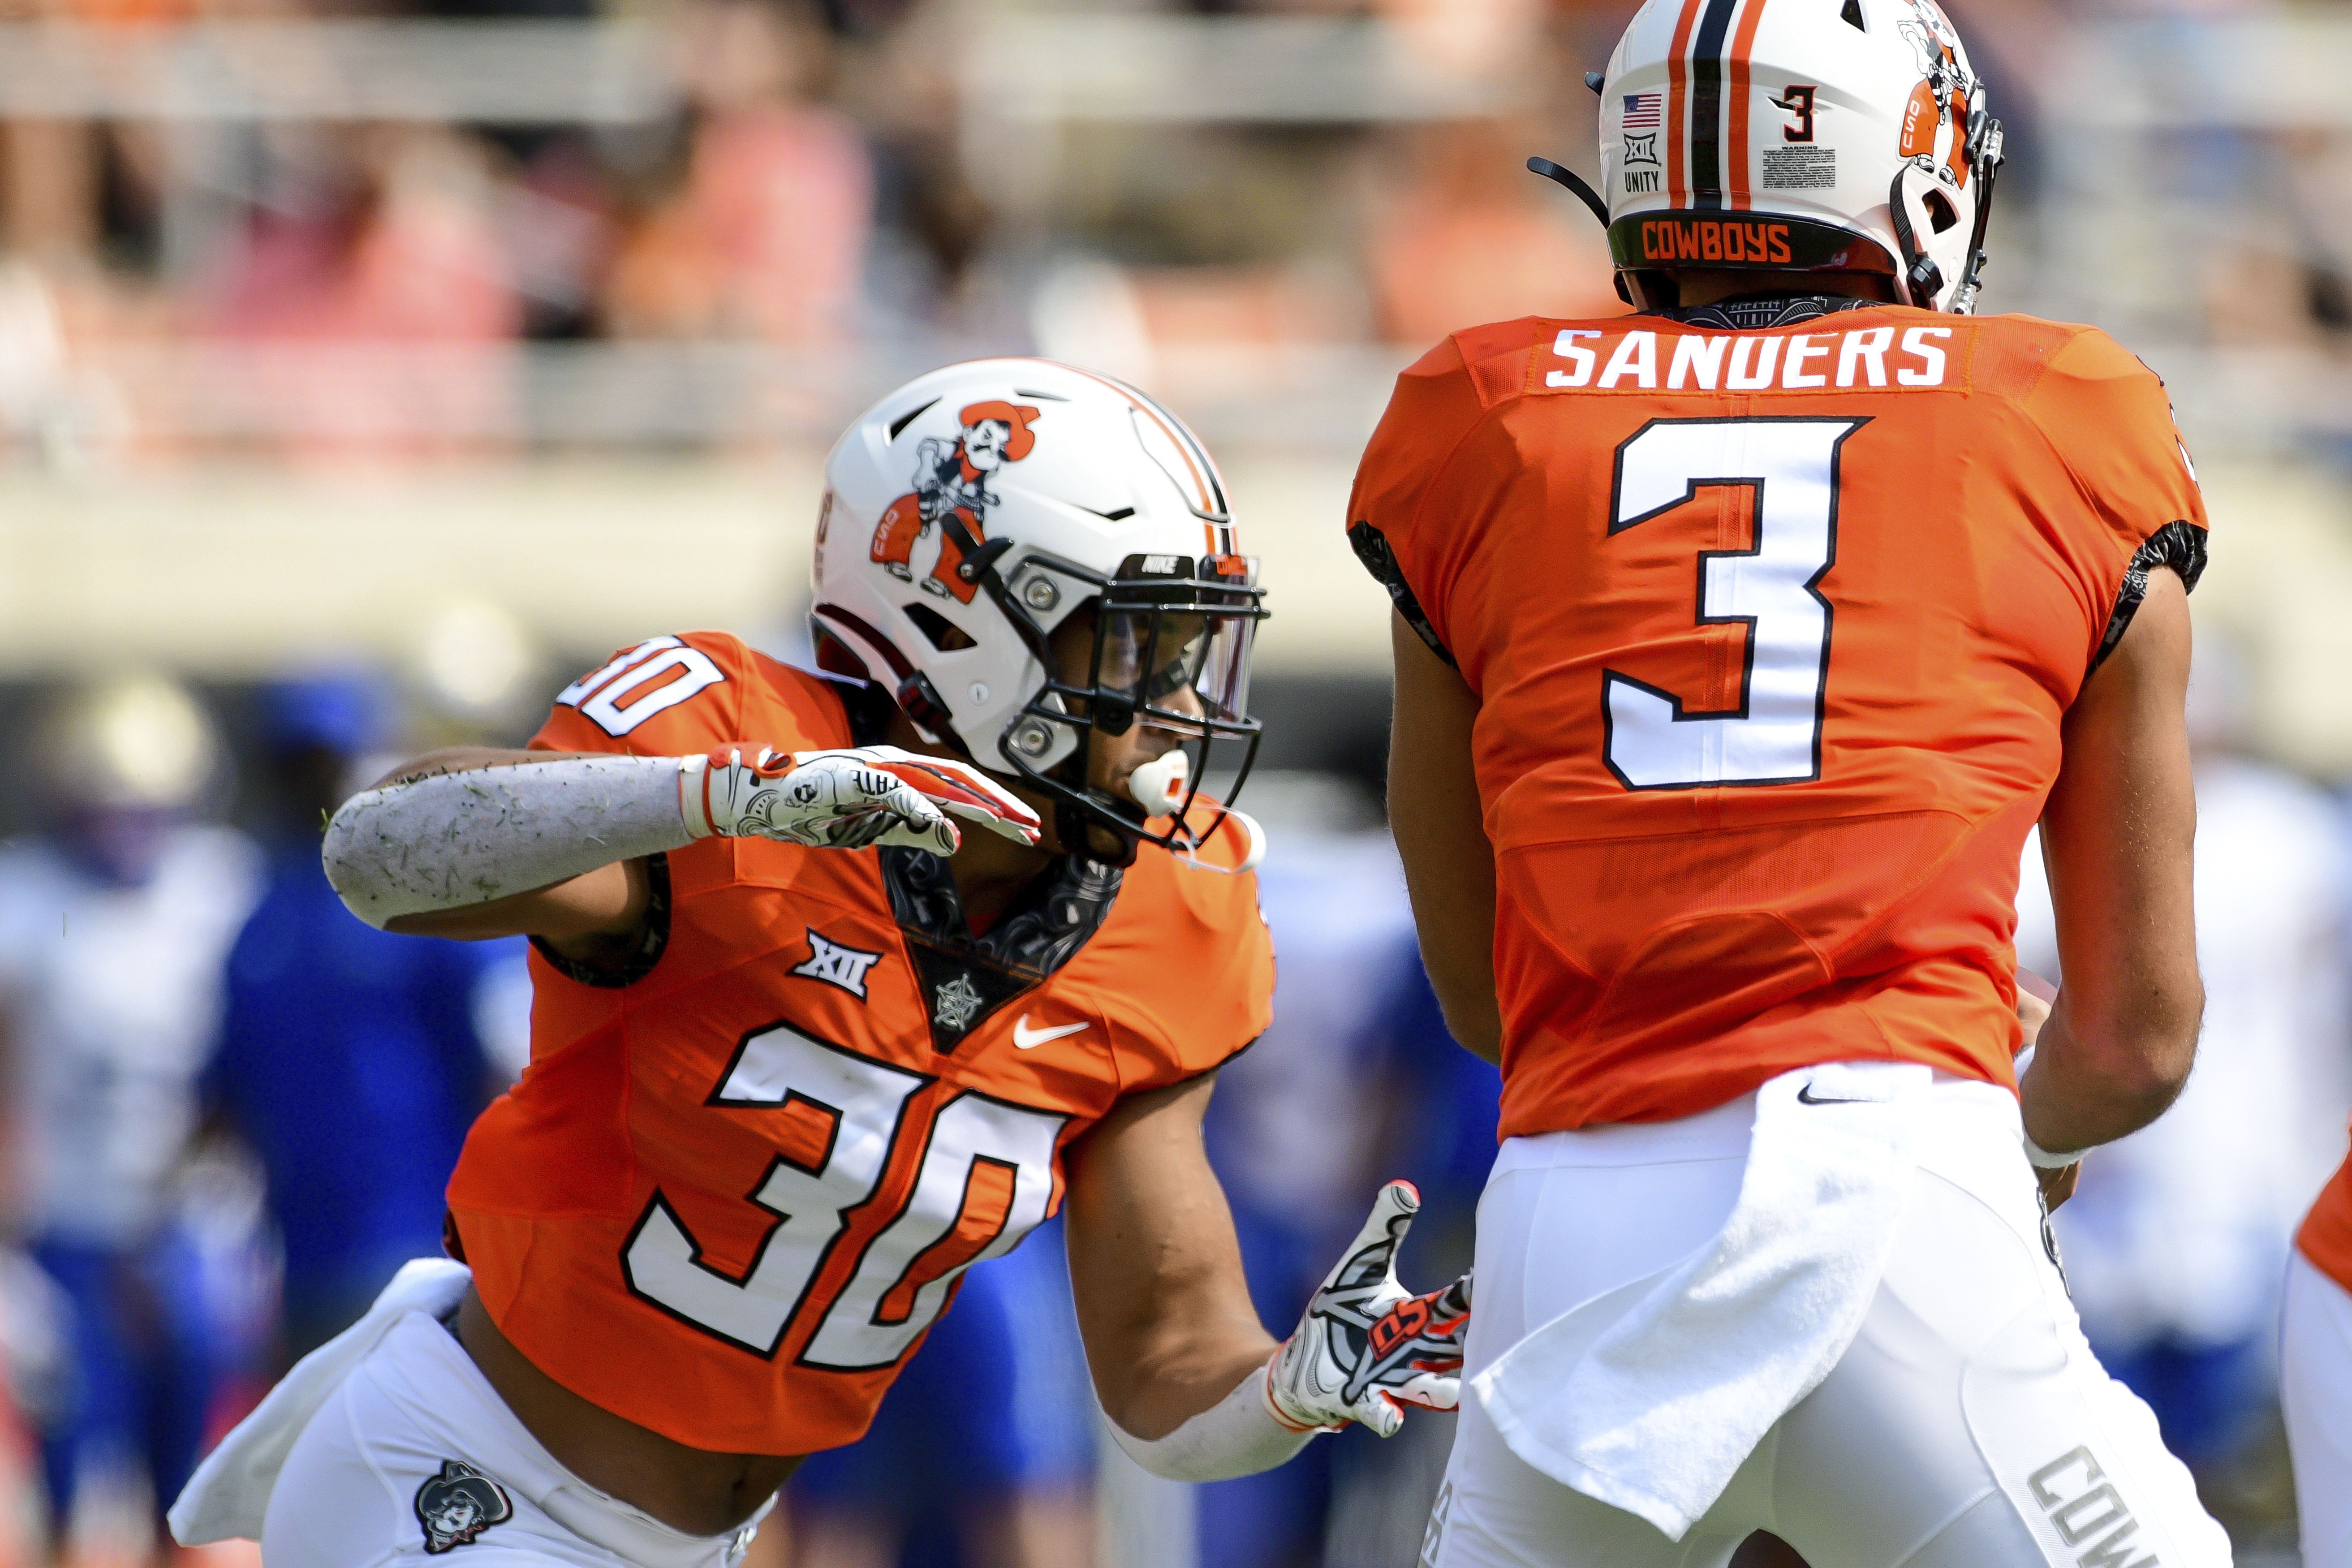 Watch Our Time: Oklahoma State Football Streaming Online